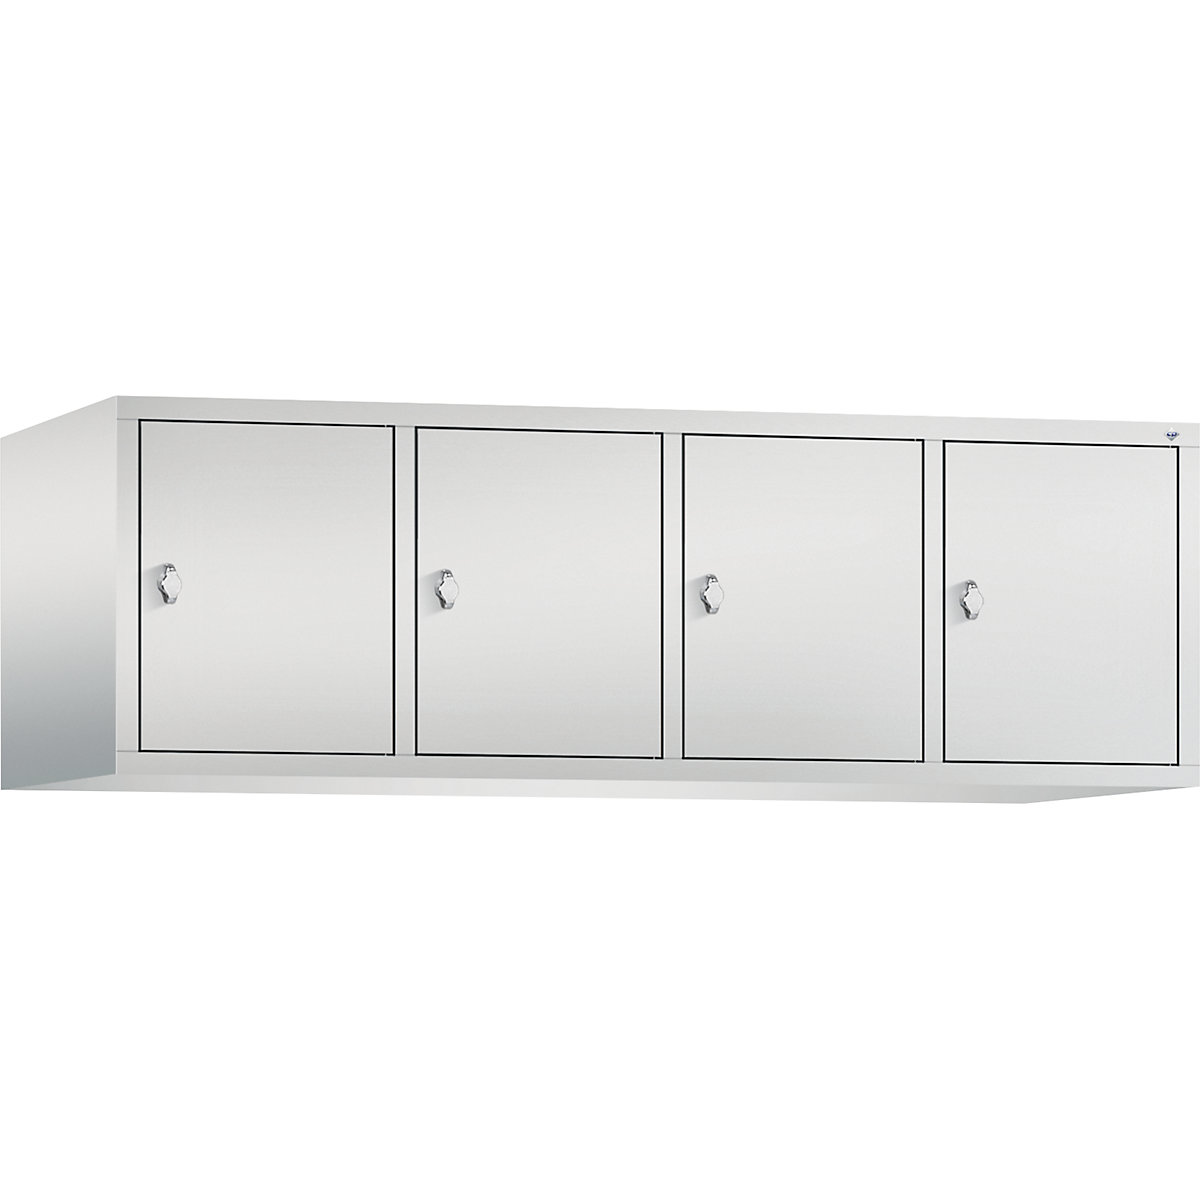 CLASSIC add-on cupboard – C+P, 4 compartments, compartment width 400 mm, light grey-3